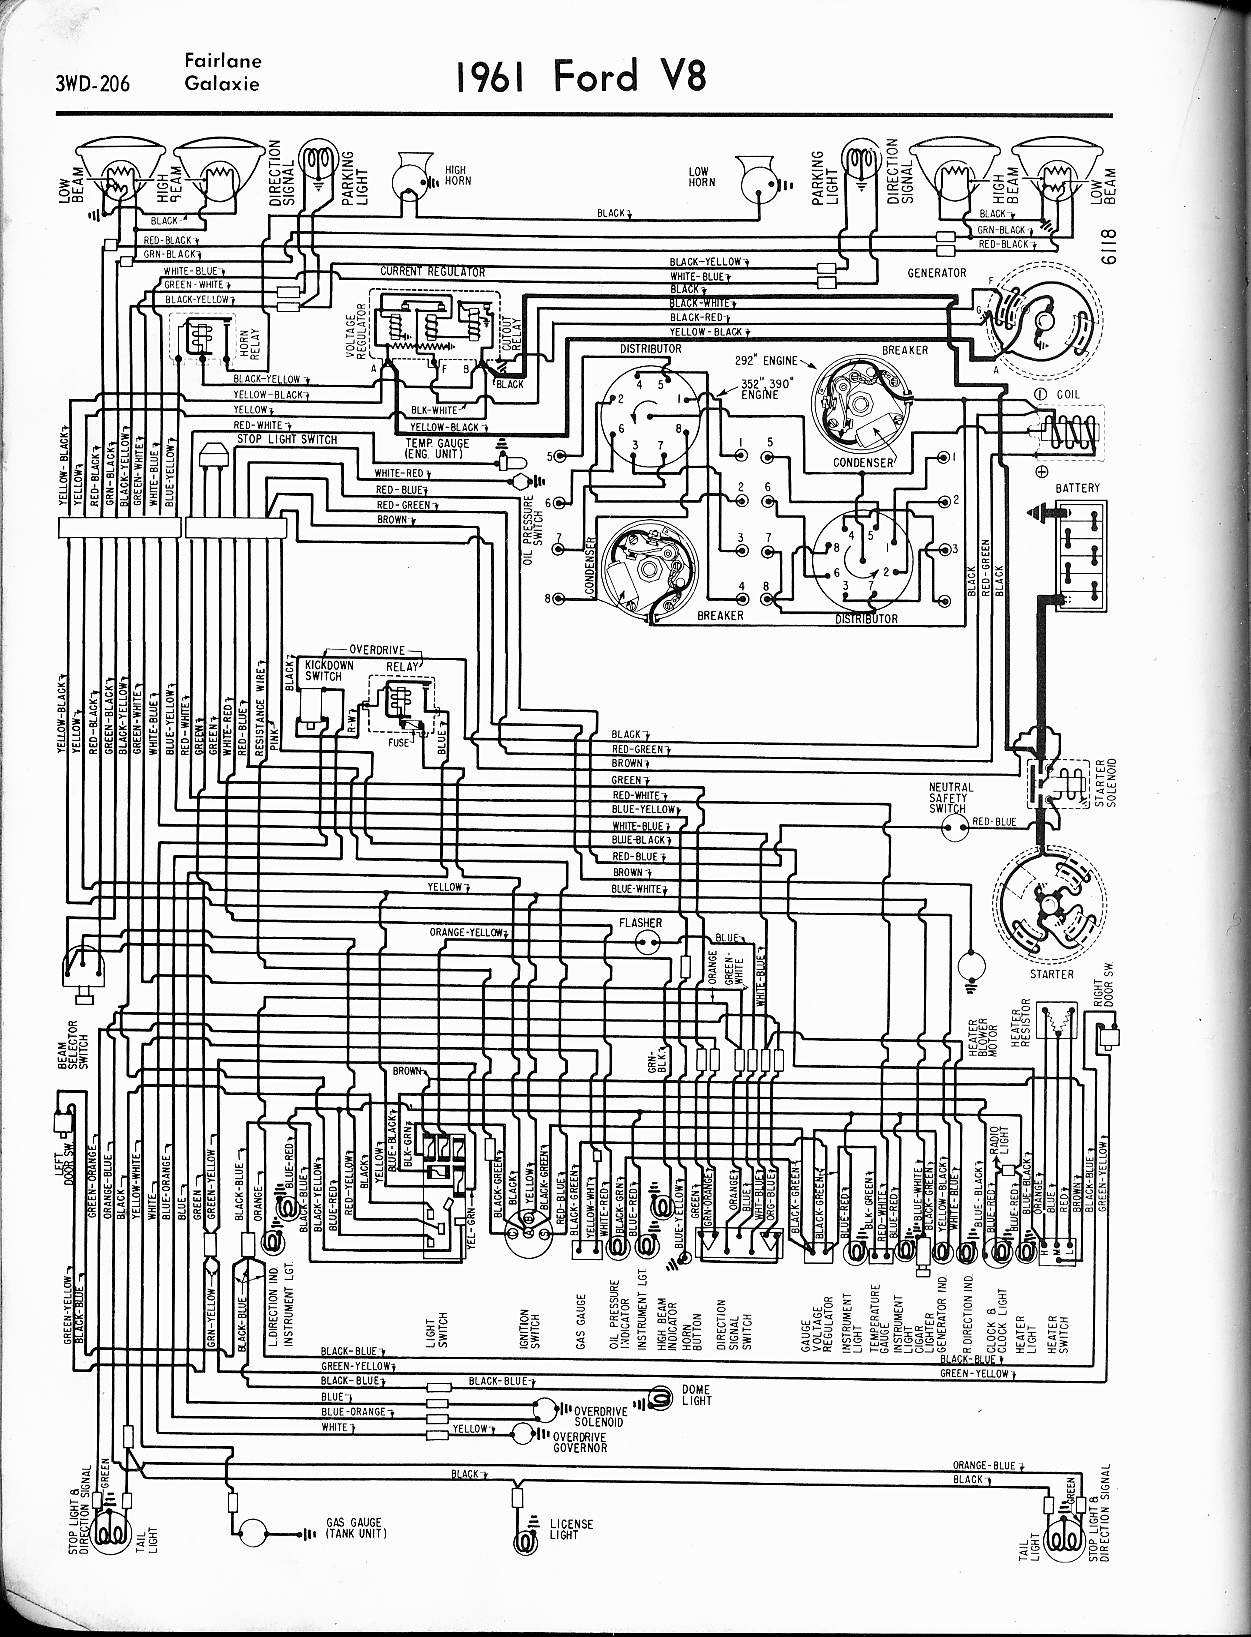 Ford Explorer Engine Diagram ford Wiring Diagram ford Wiring Diagram Http 1957 ford Wiring Of Ford Explorer Engine Diagram